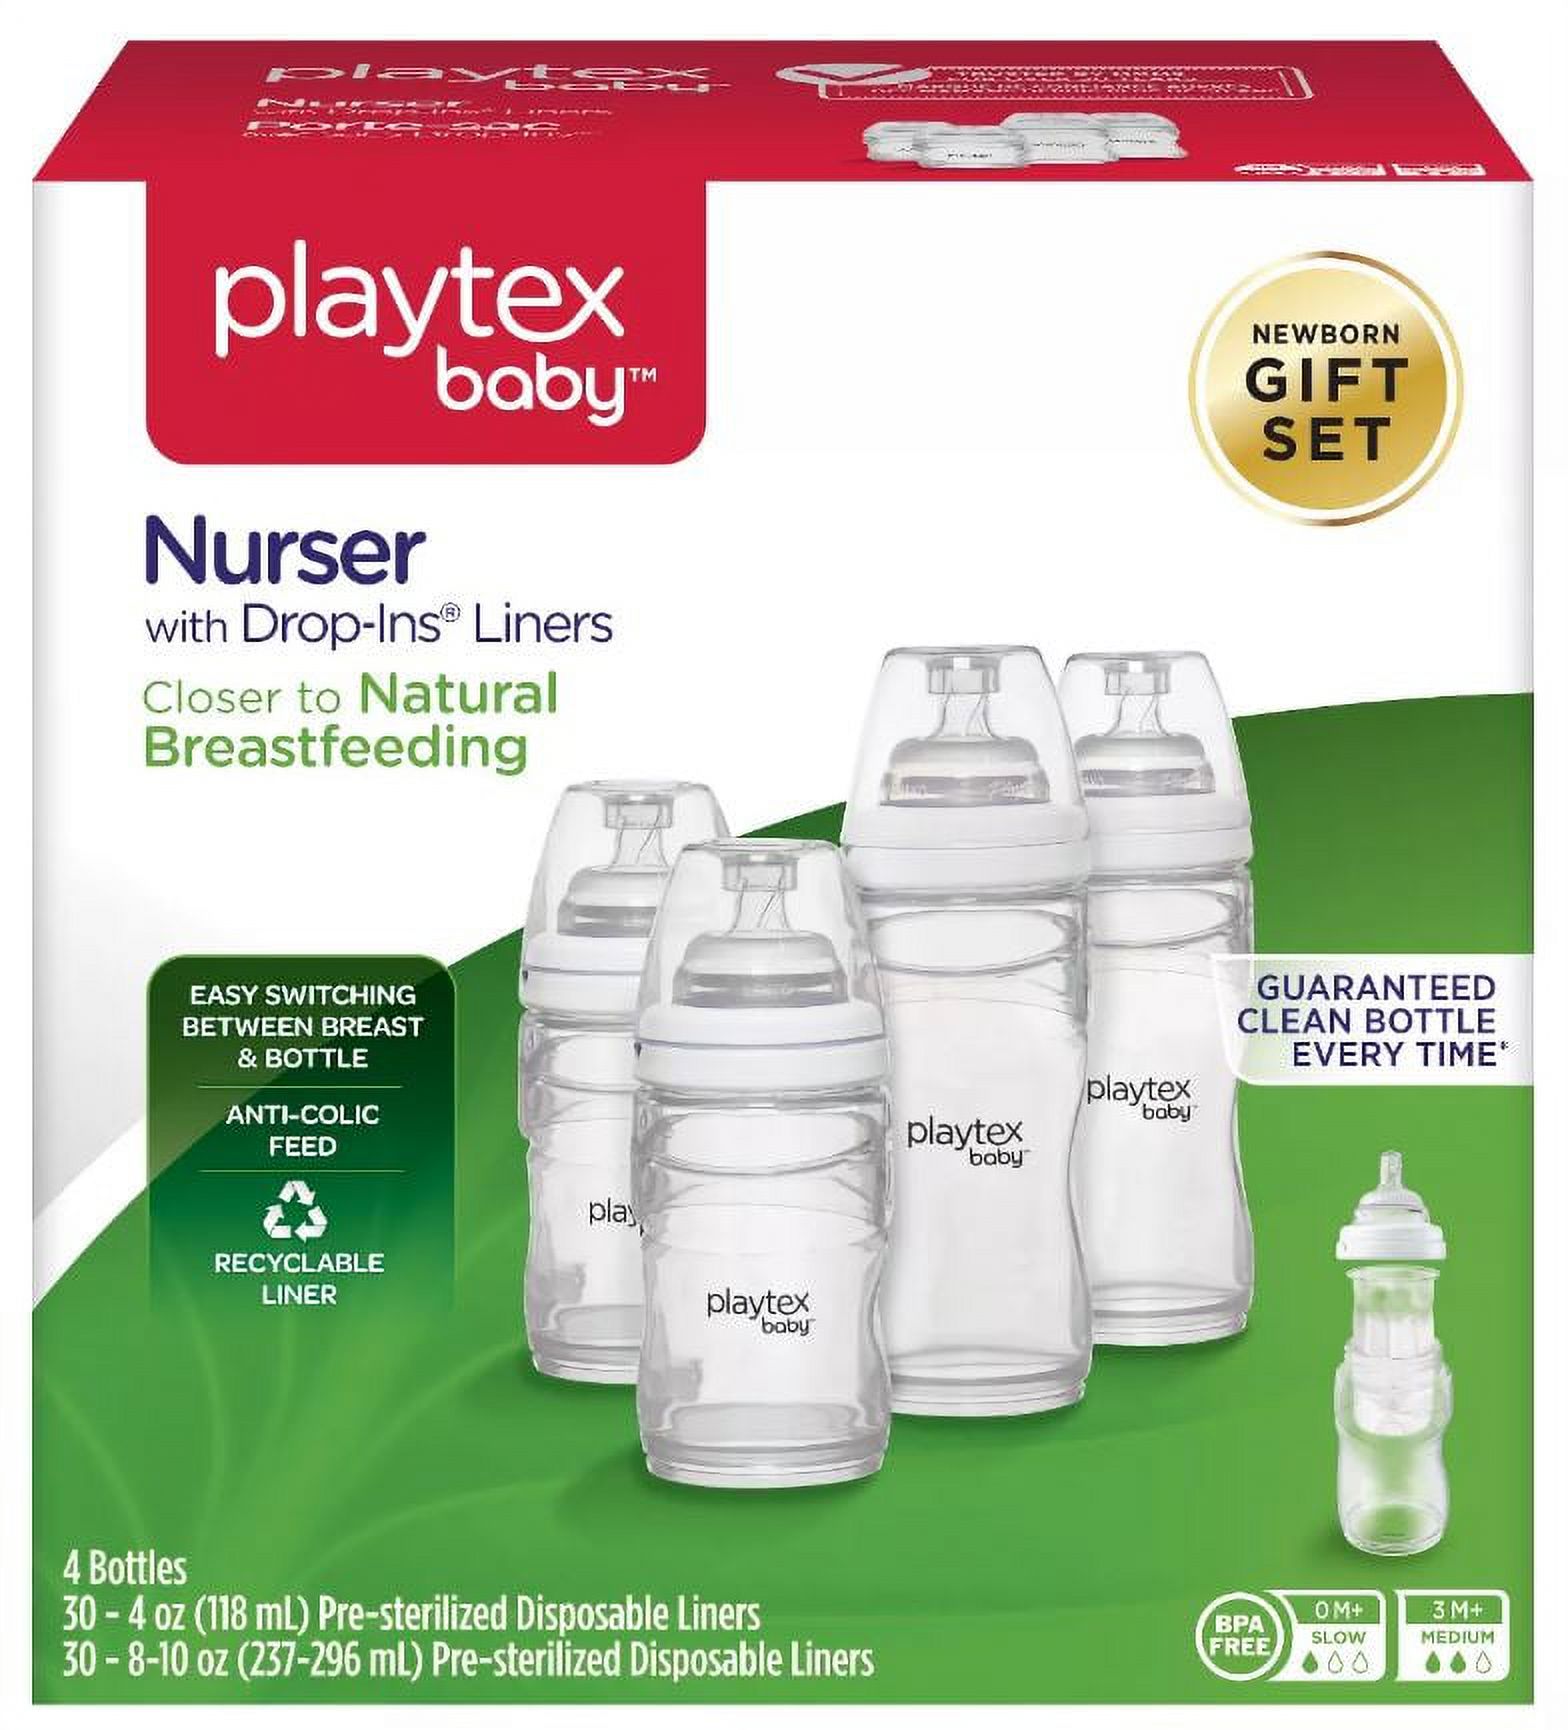 Playtex Baby Nurser with Drop-Ins Liners Baby Bottle Newborn Gift Set - image 1 of 4